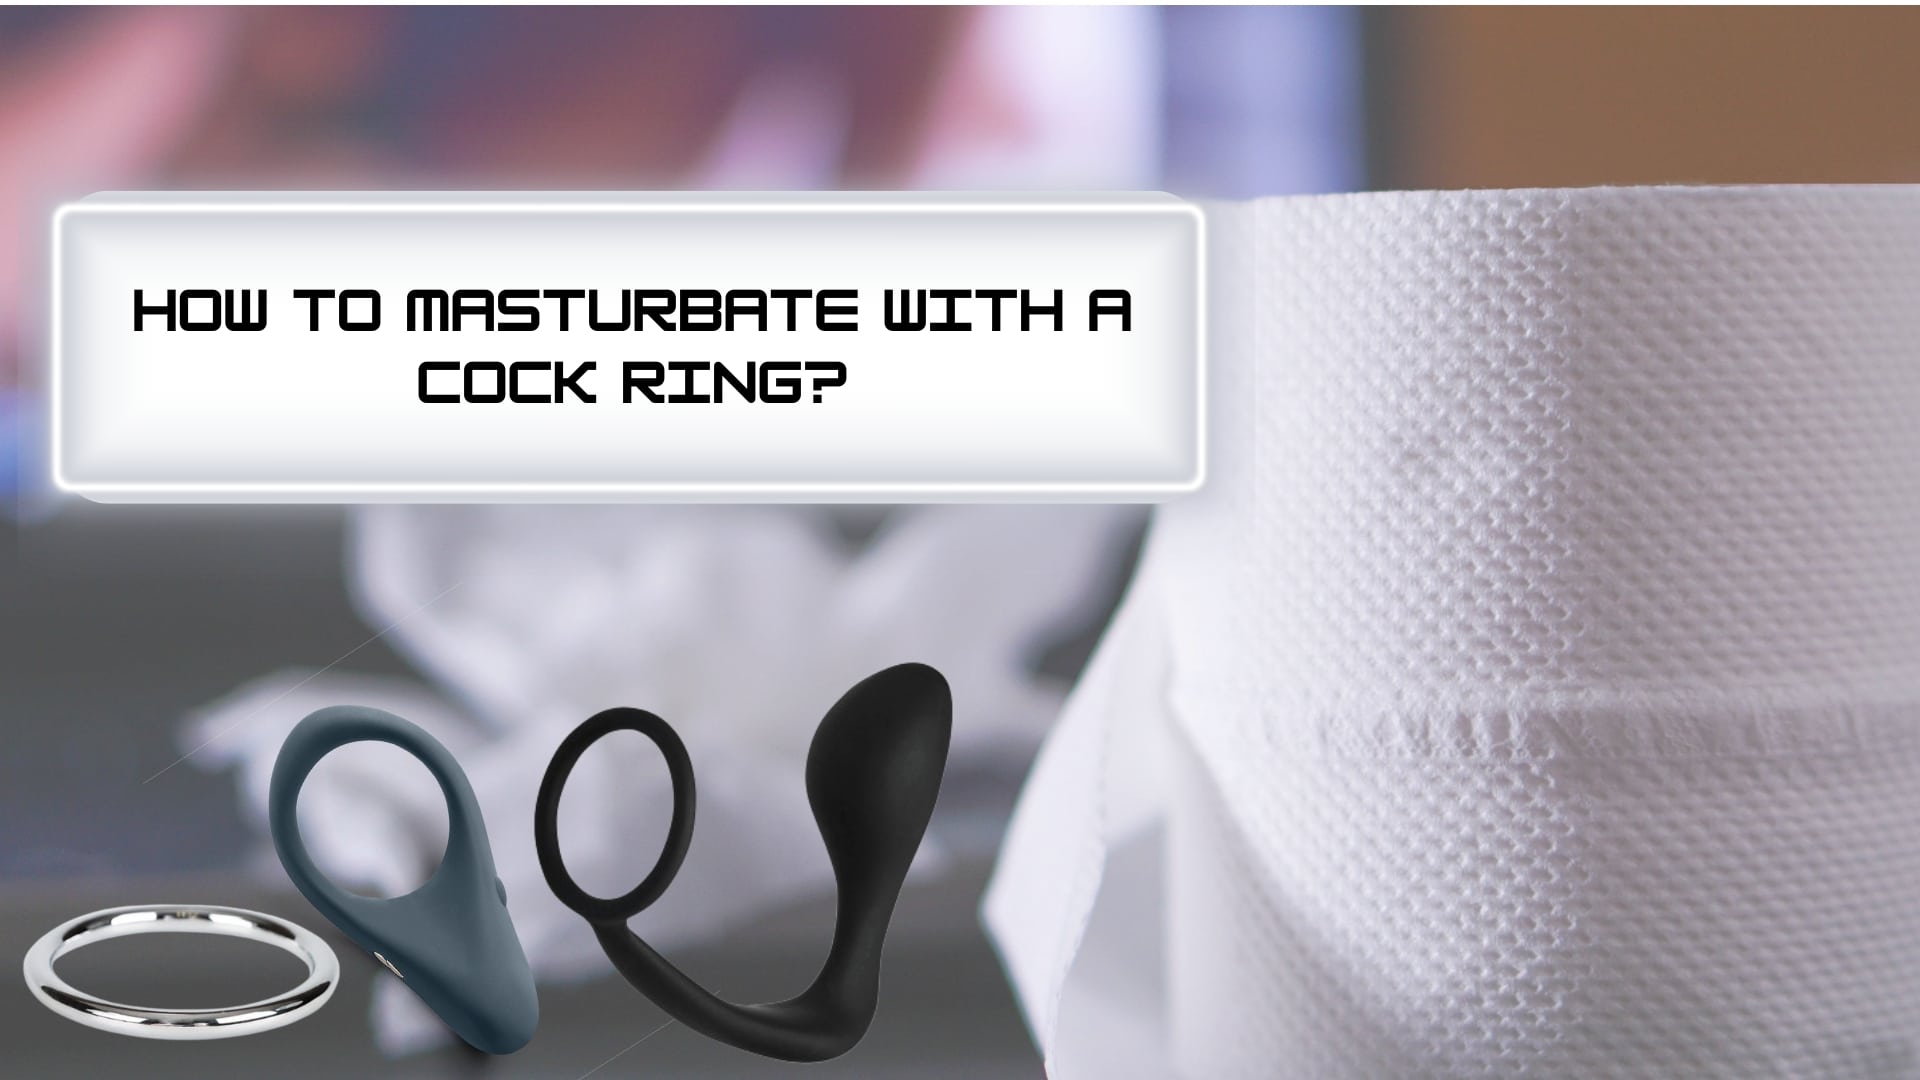 How to Masturbate With a Cock Ring?